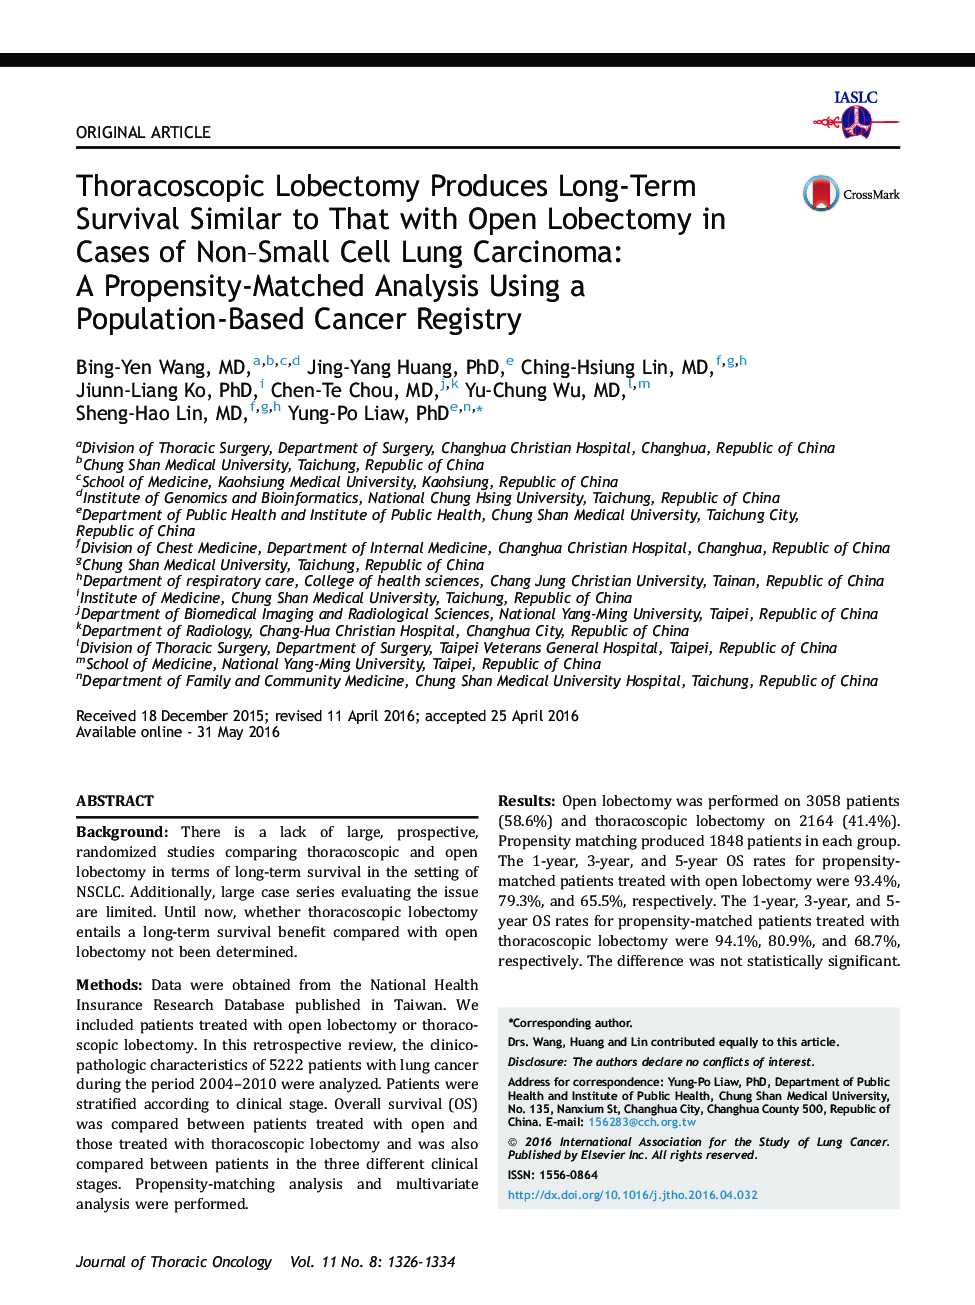 Thoracoscopic Lobectomy Produces Long-Term Survival Similar to That with Open Lobectomy in Cases of Non-Small Cell Lung Carcinoma: AÂ Propensity-Matched Analysis Using a Population-Based Cancer Registry